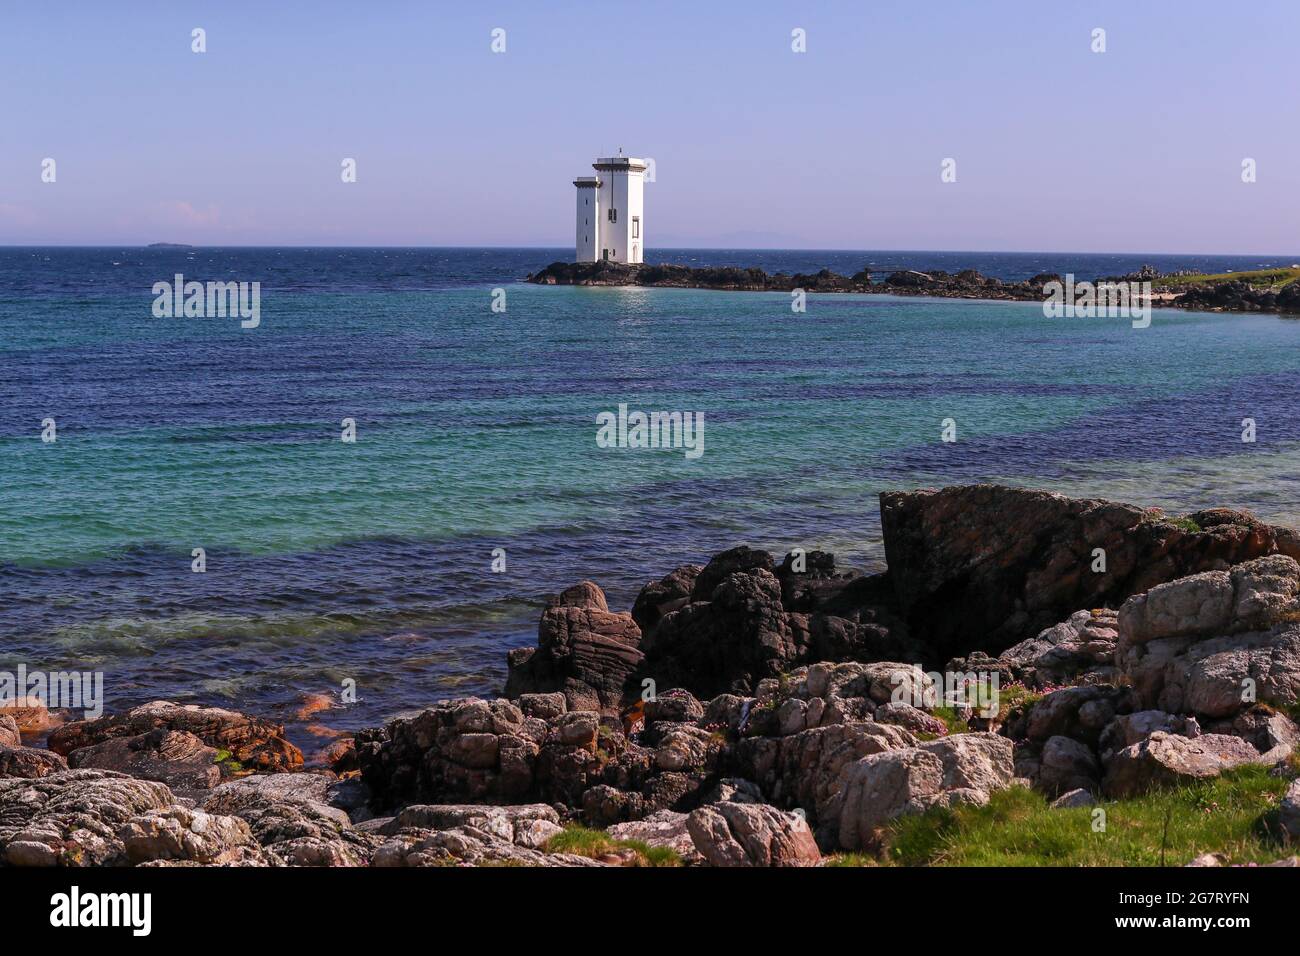 Carraig Fhada Lighthouse on the Isle of Islay off the west coast of Scotland.  The small island is famous for it many whisky distilleries. Stock Photo